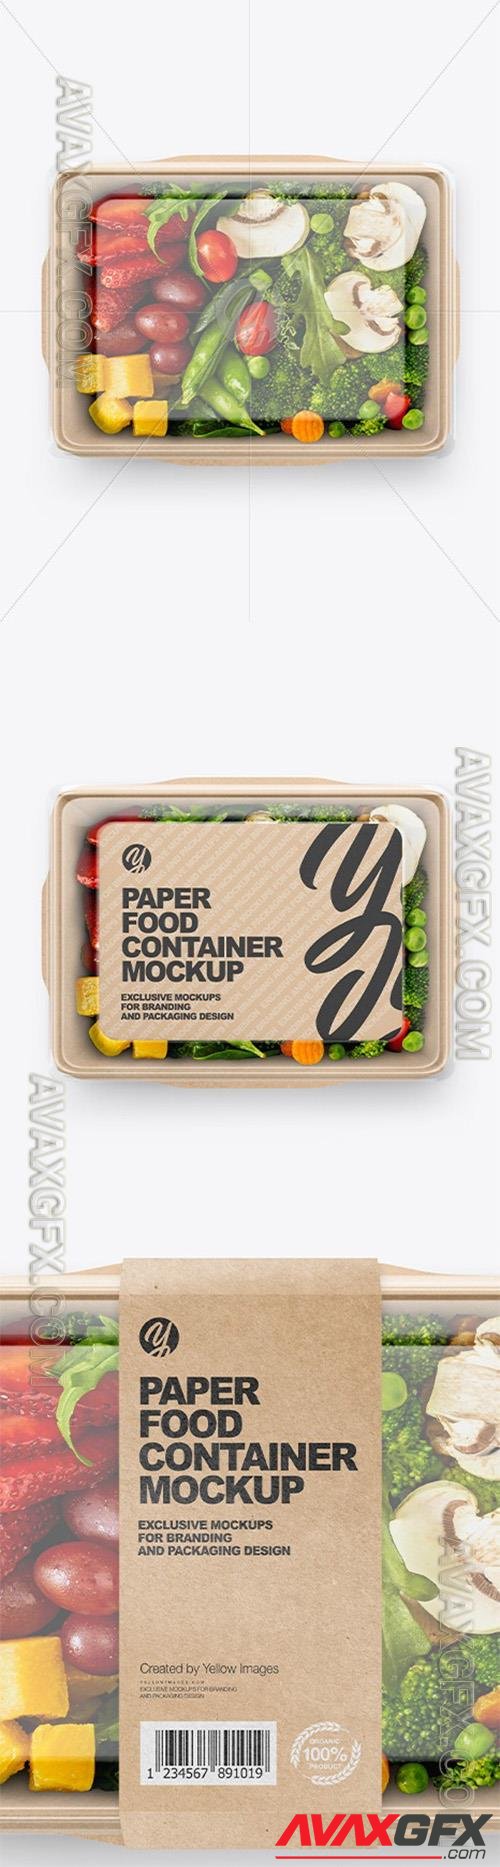 Paper Food Container With Vegan Lunch Mockup 89806 TIF